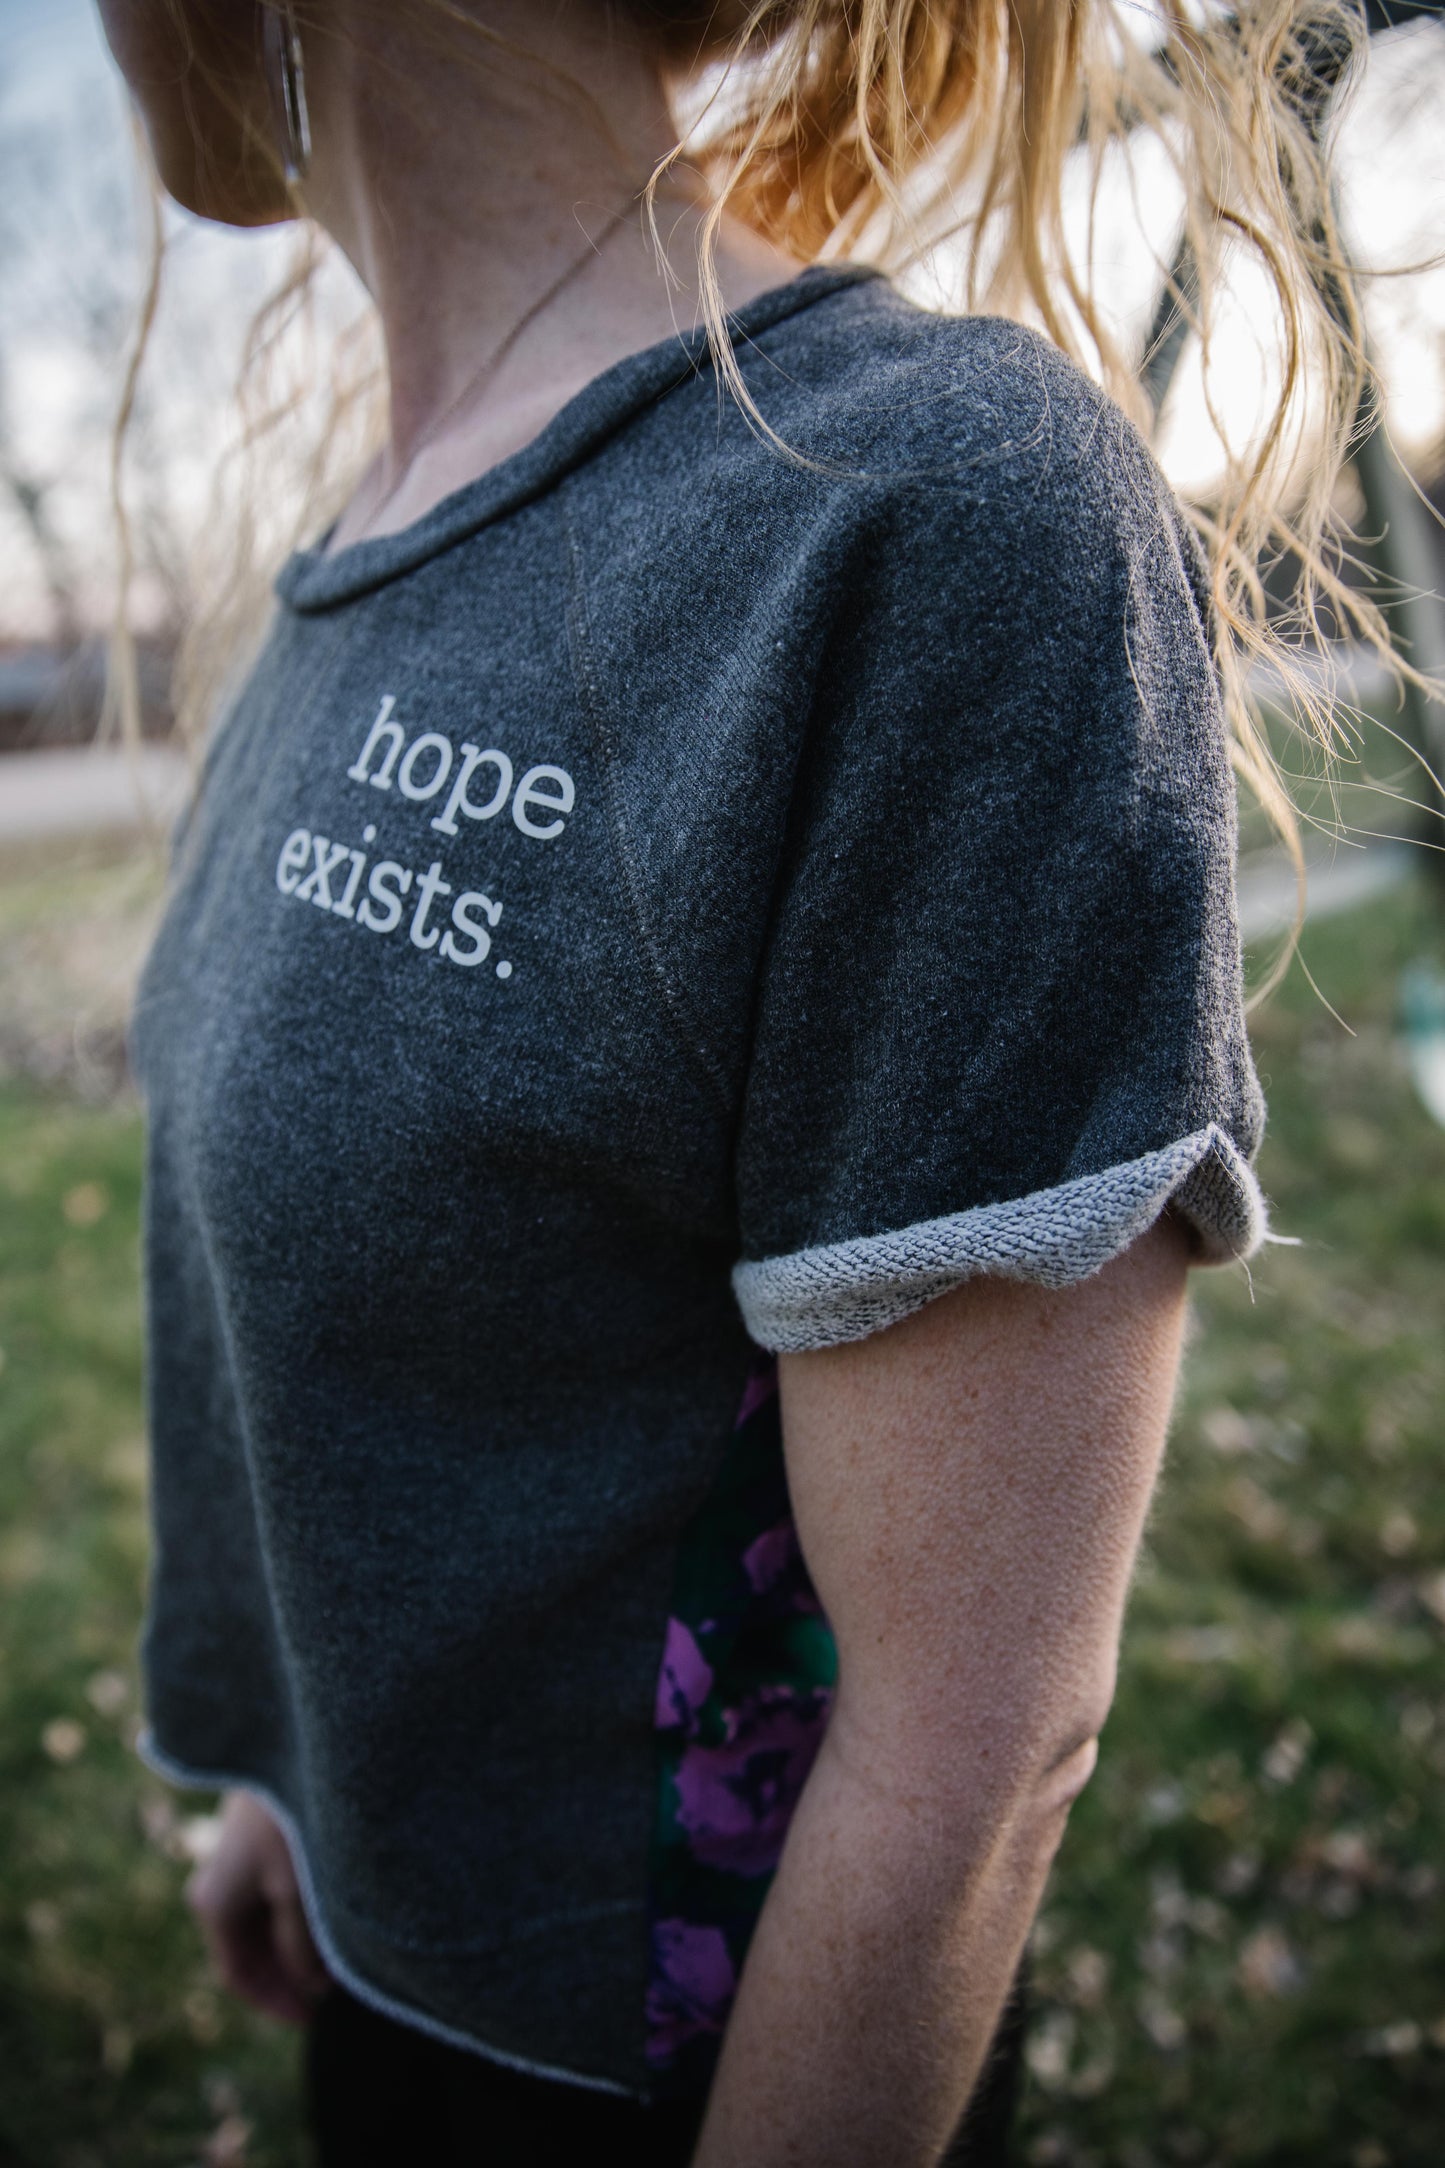 hope exists. (M)